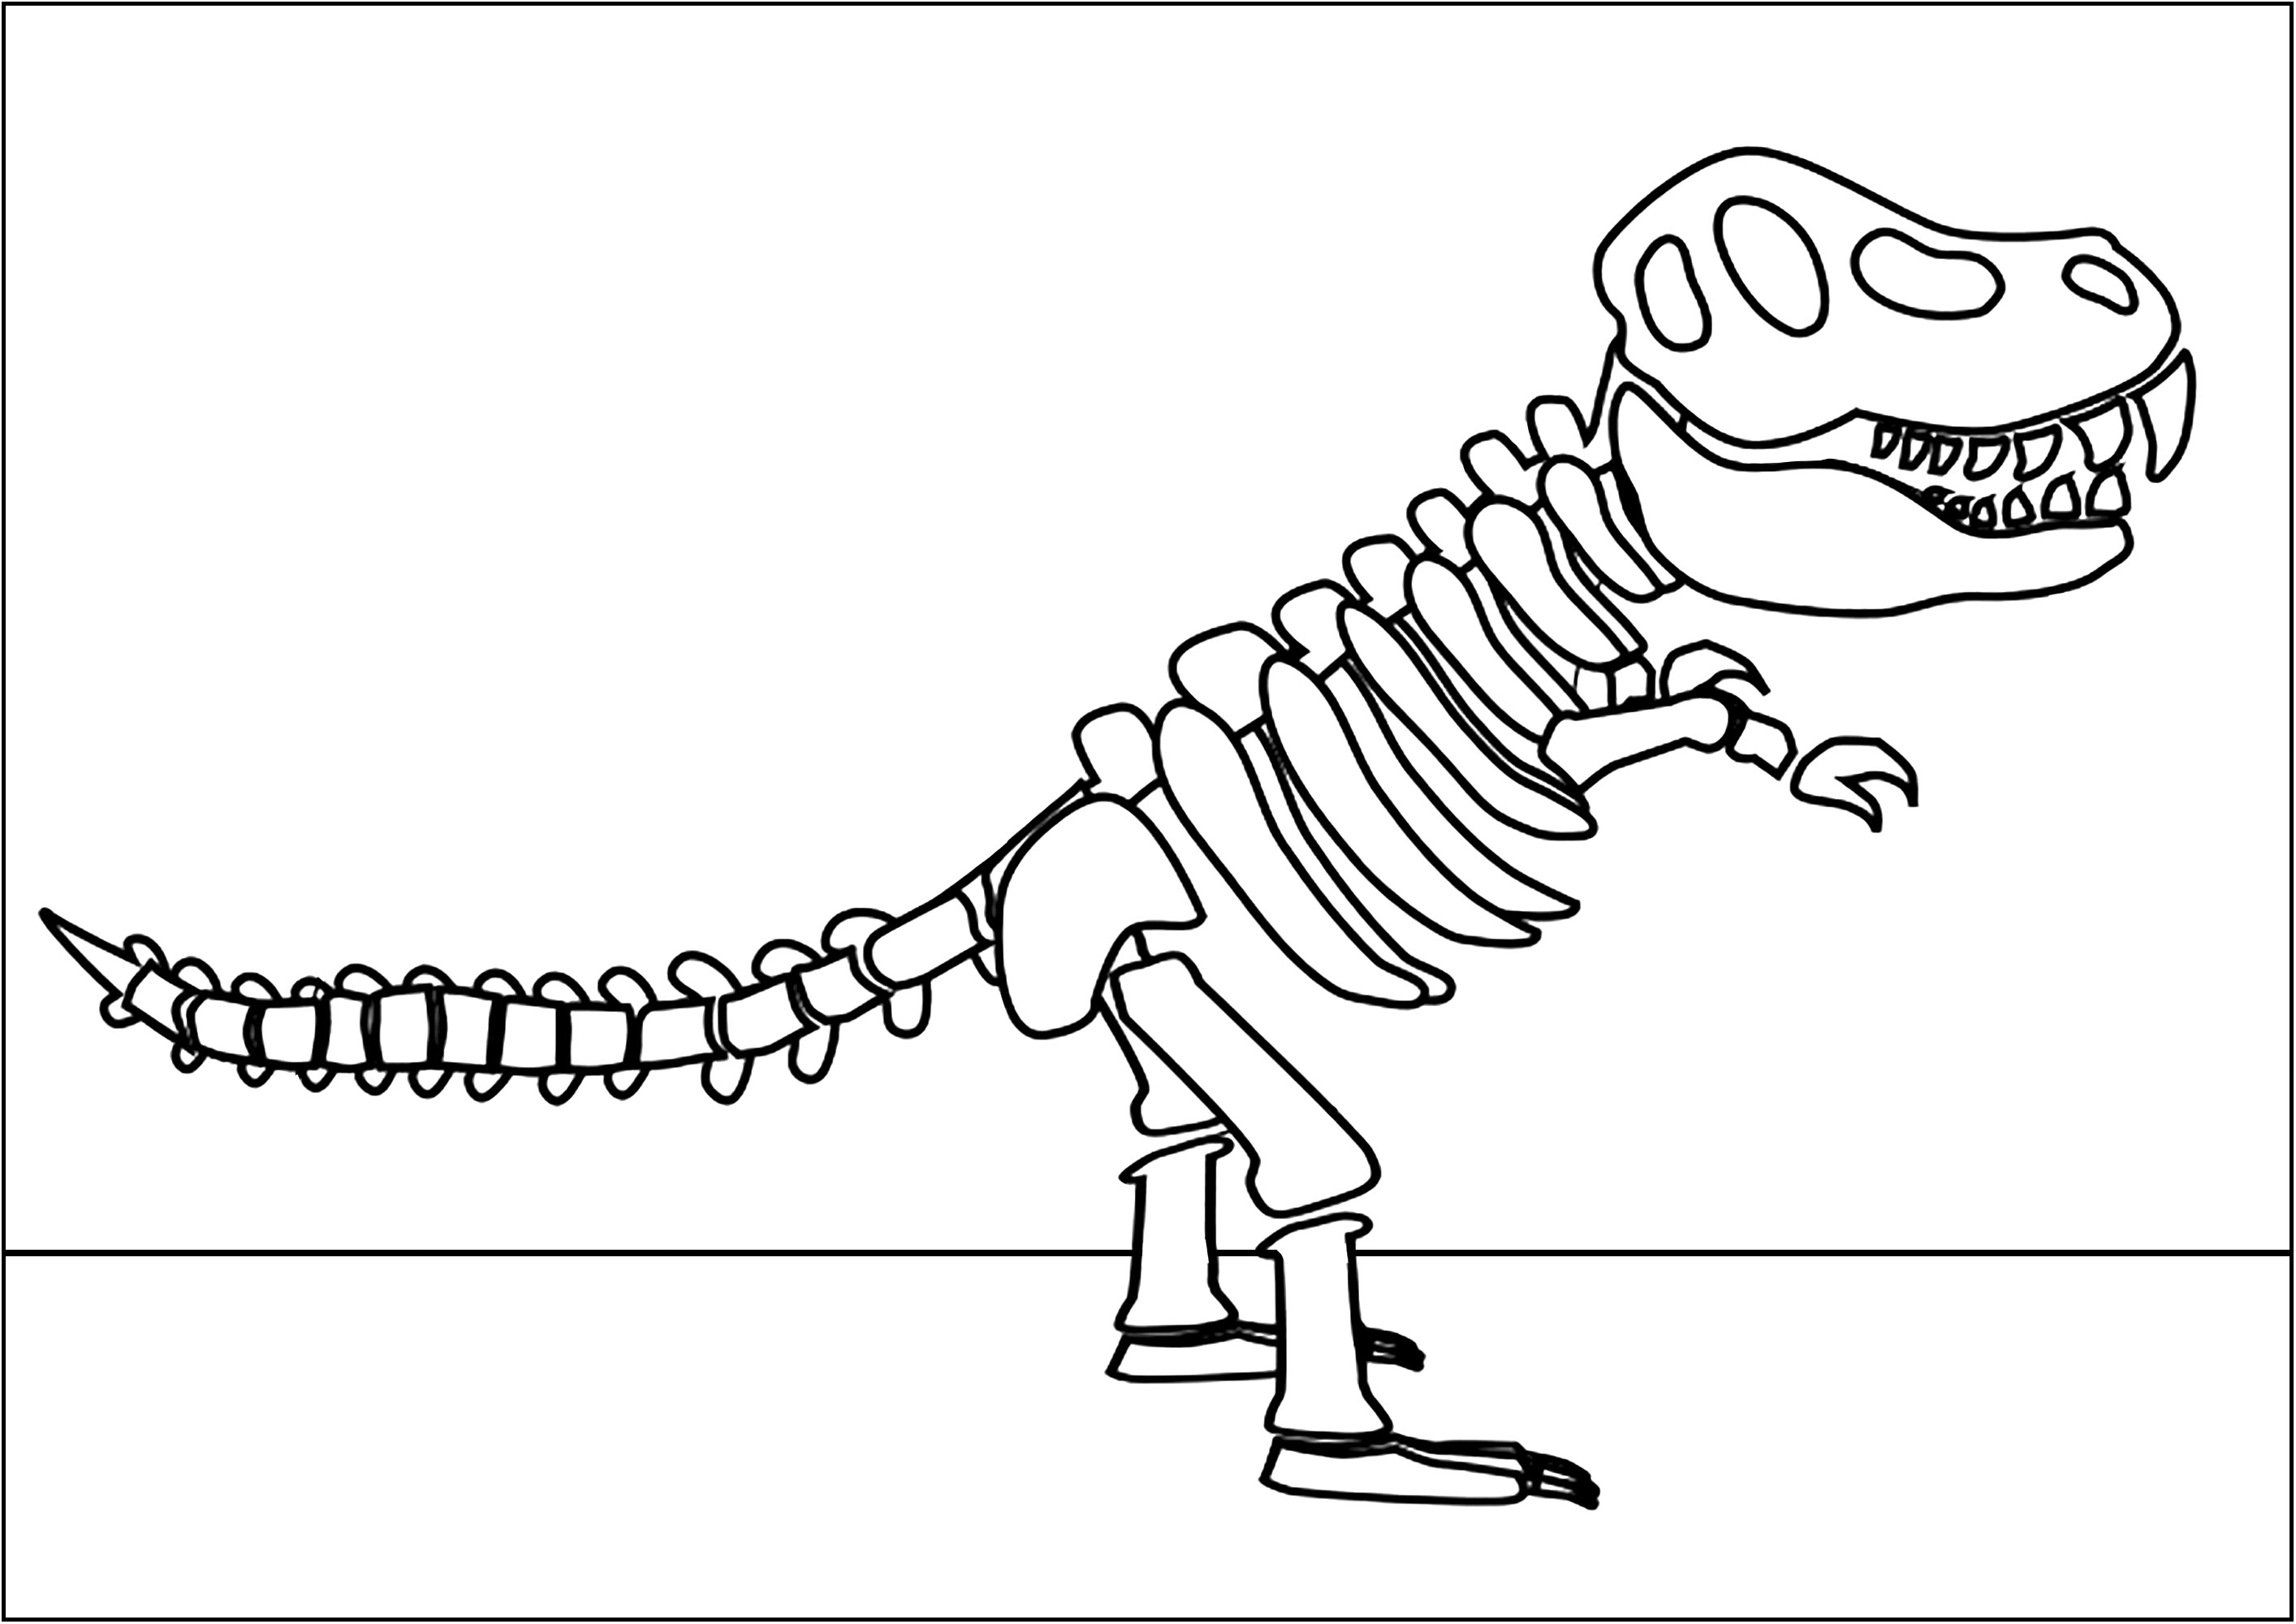 Simple Dinosaurs coloring page